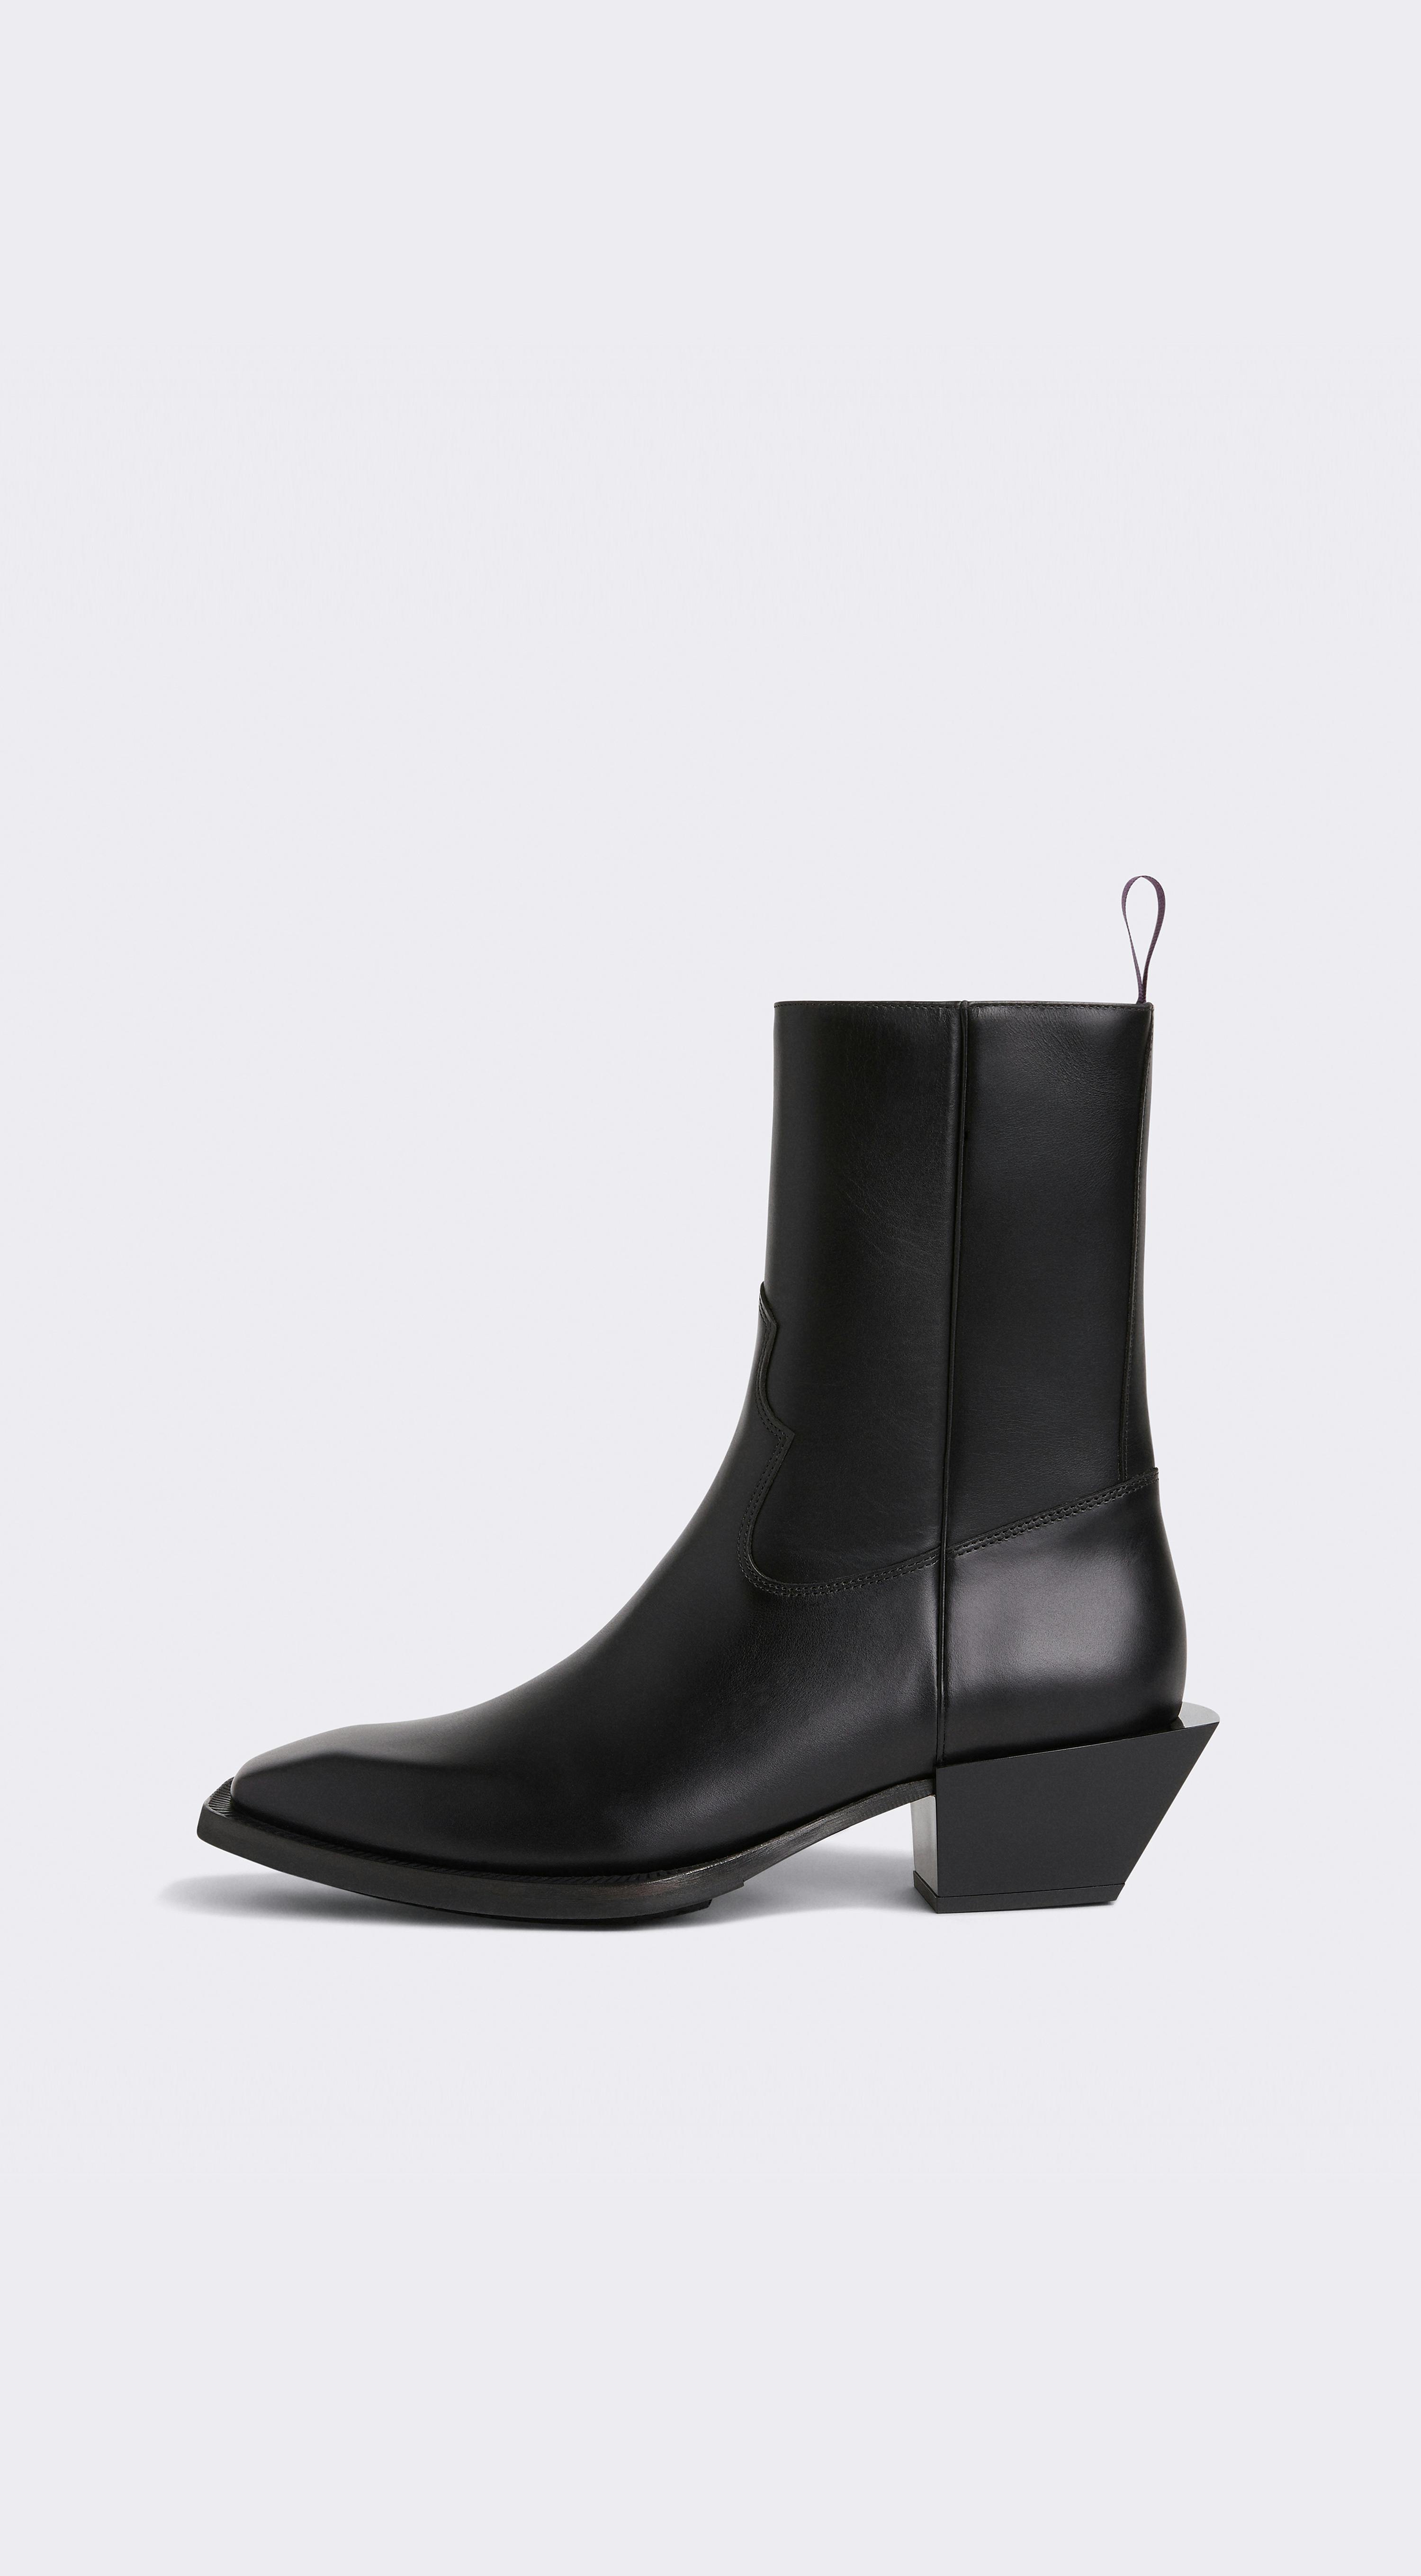 EYTYS Luciano Black Boots EYTYS